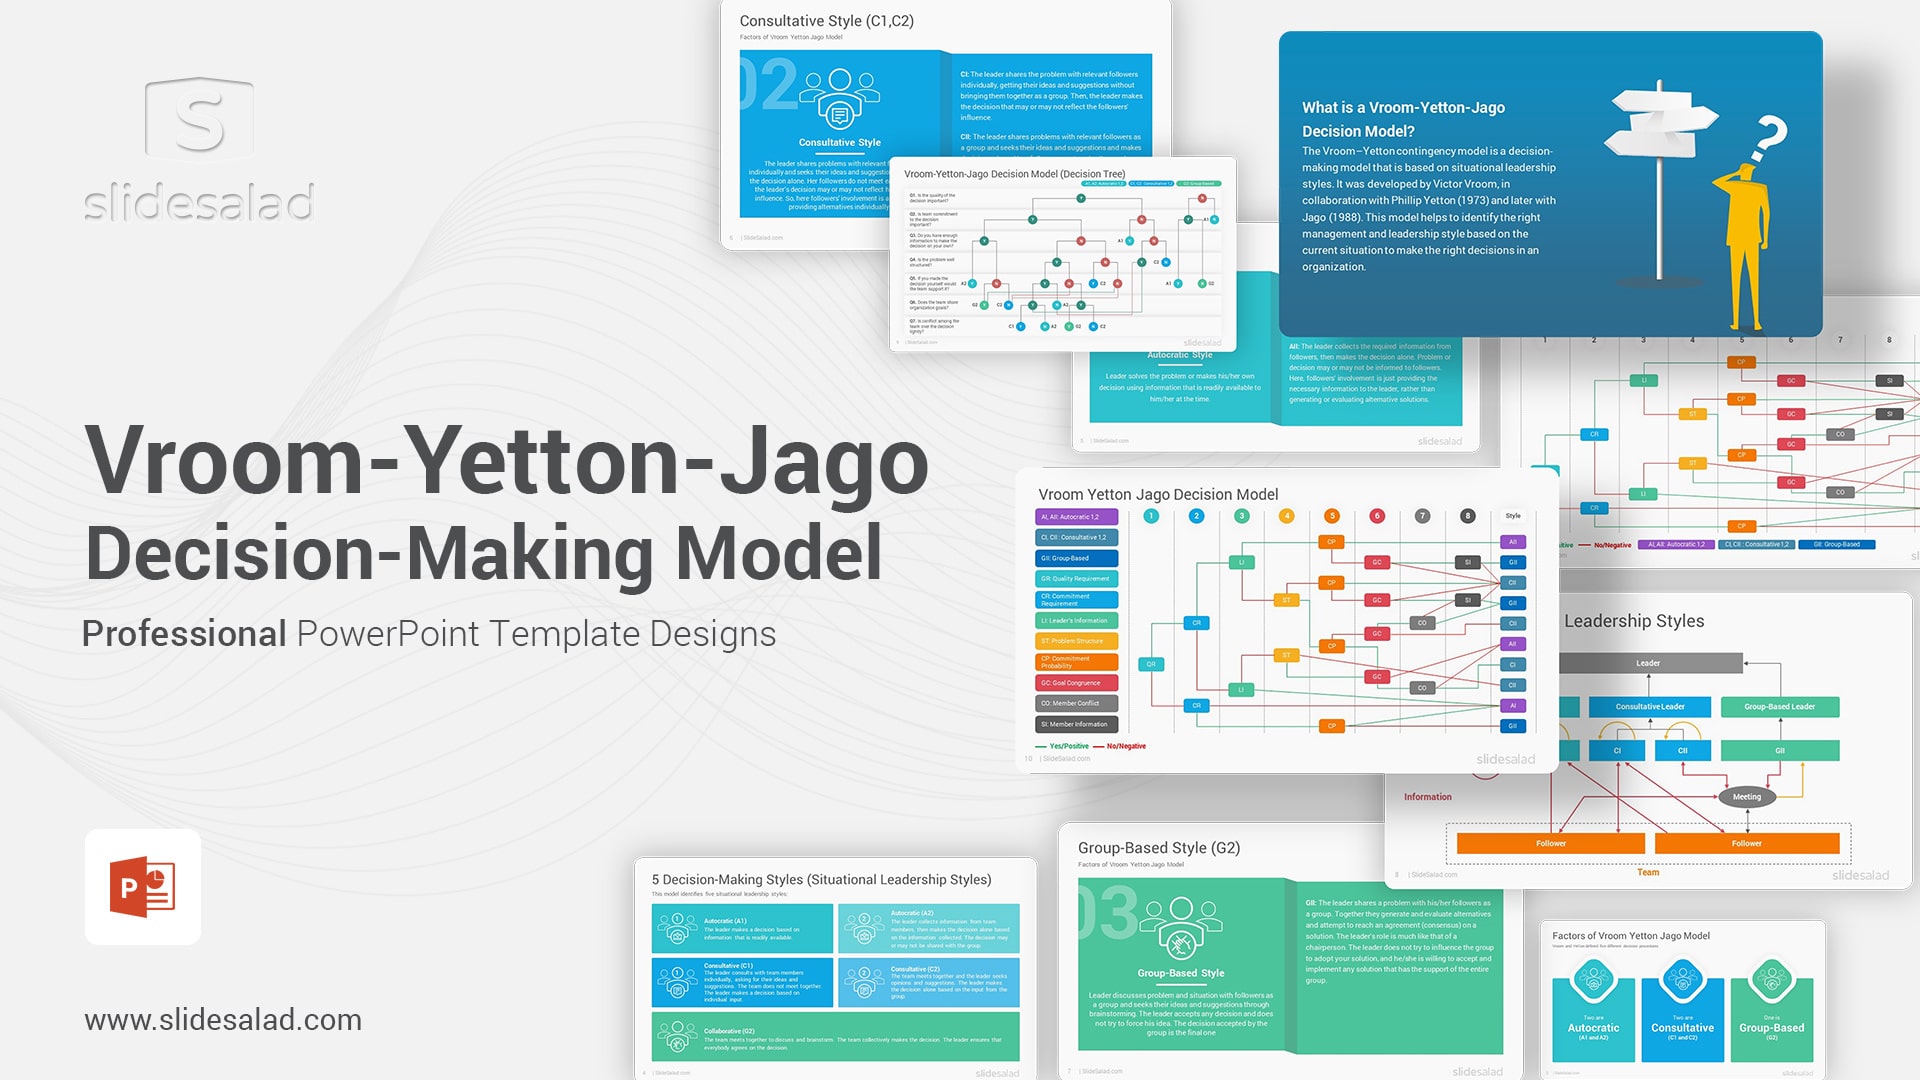 Vroom Yetton Jago Decision Model PowerPoint Template - Recommended Leadership Theory for Decision Makers to Make Decisions